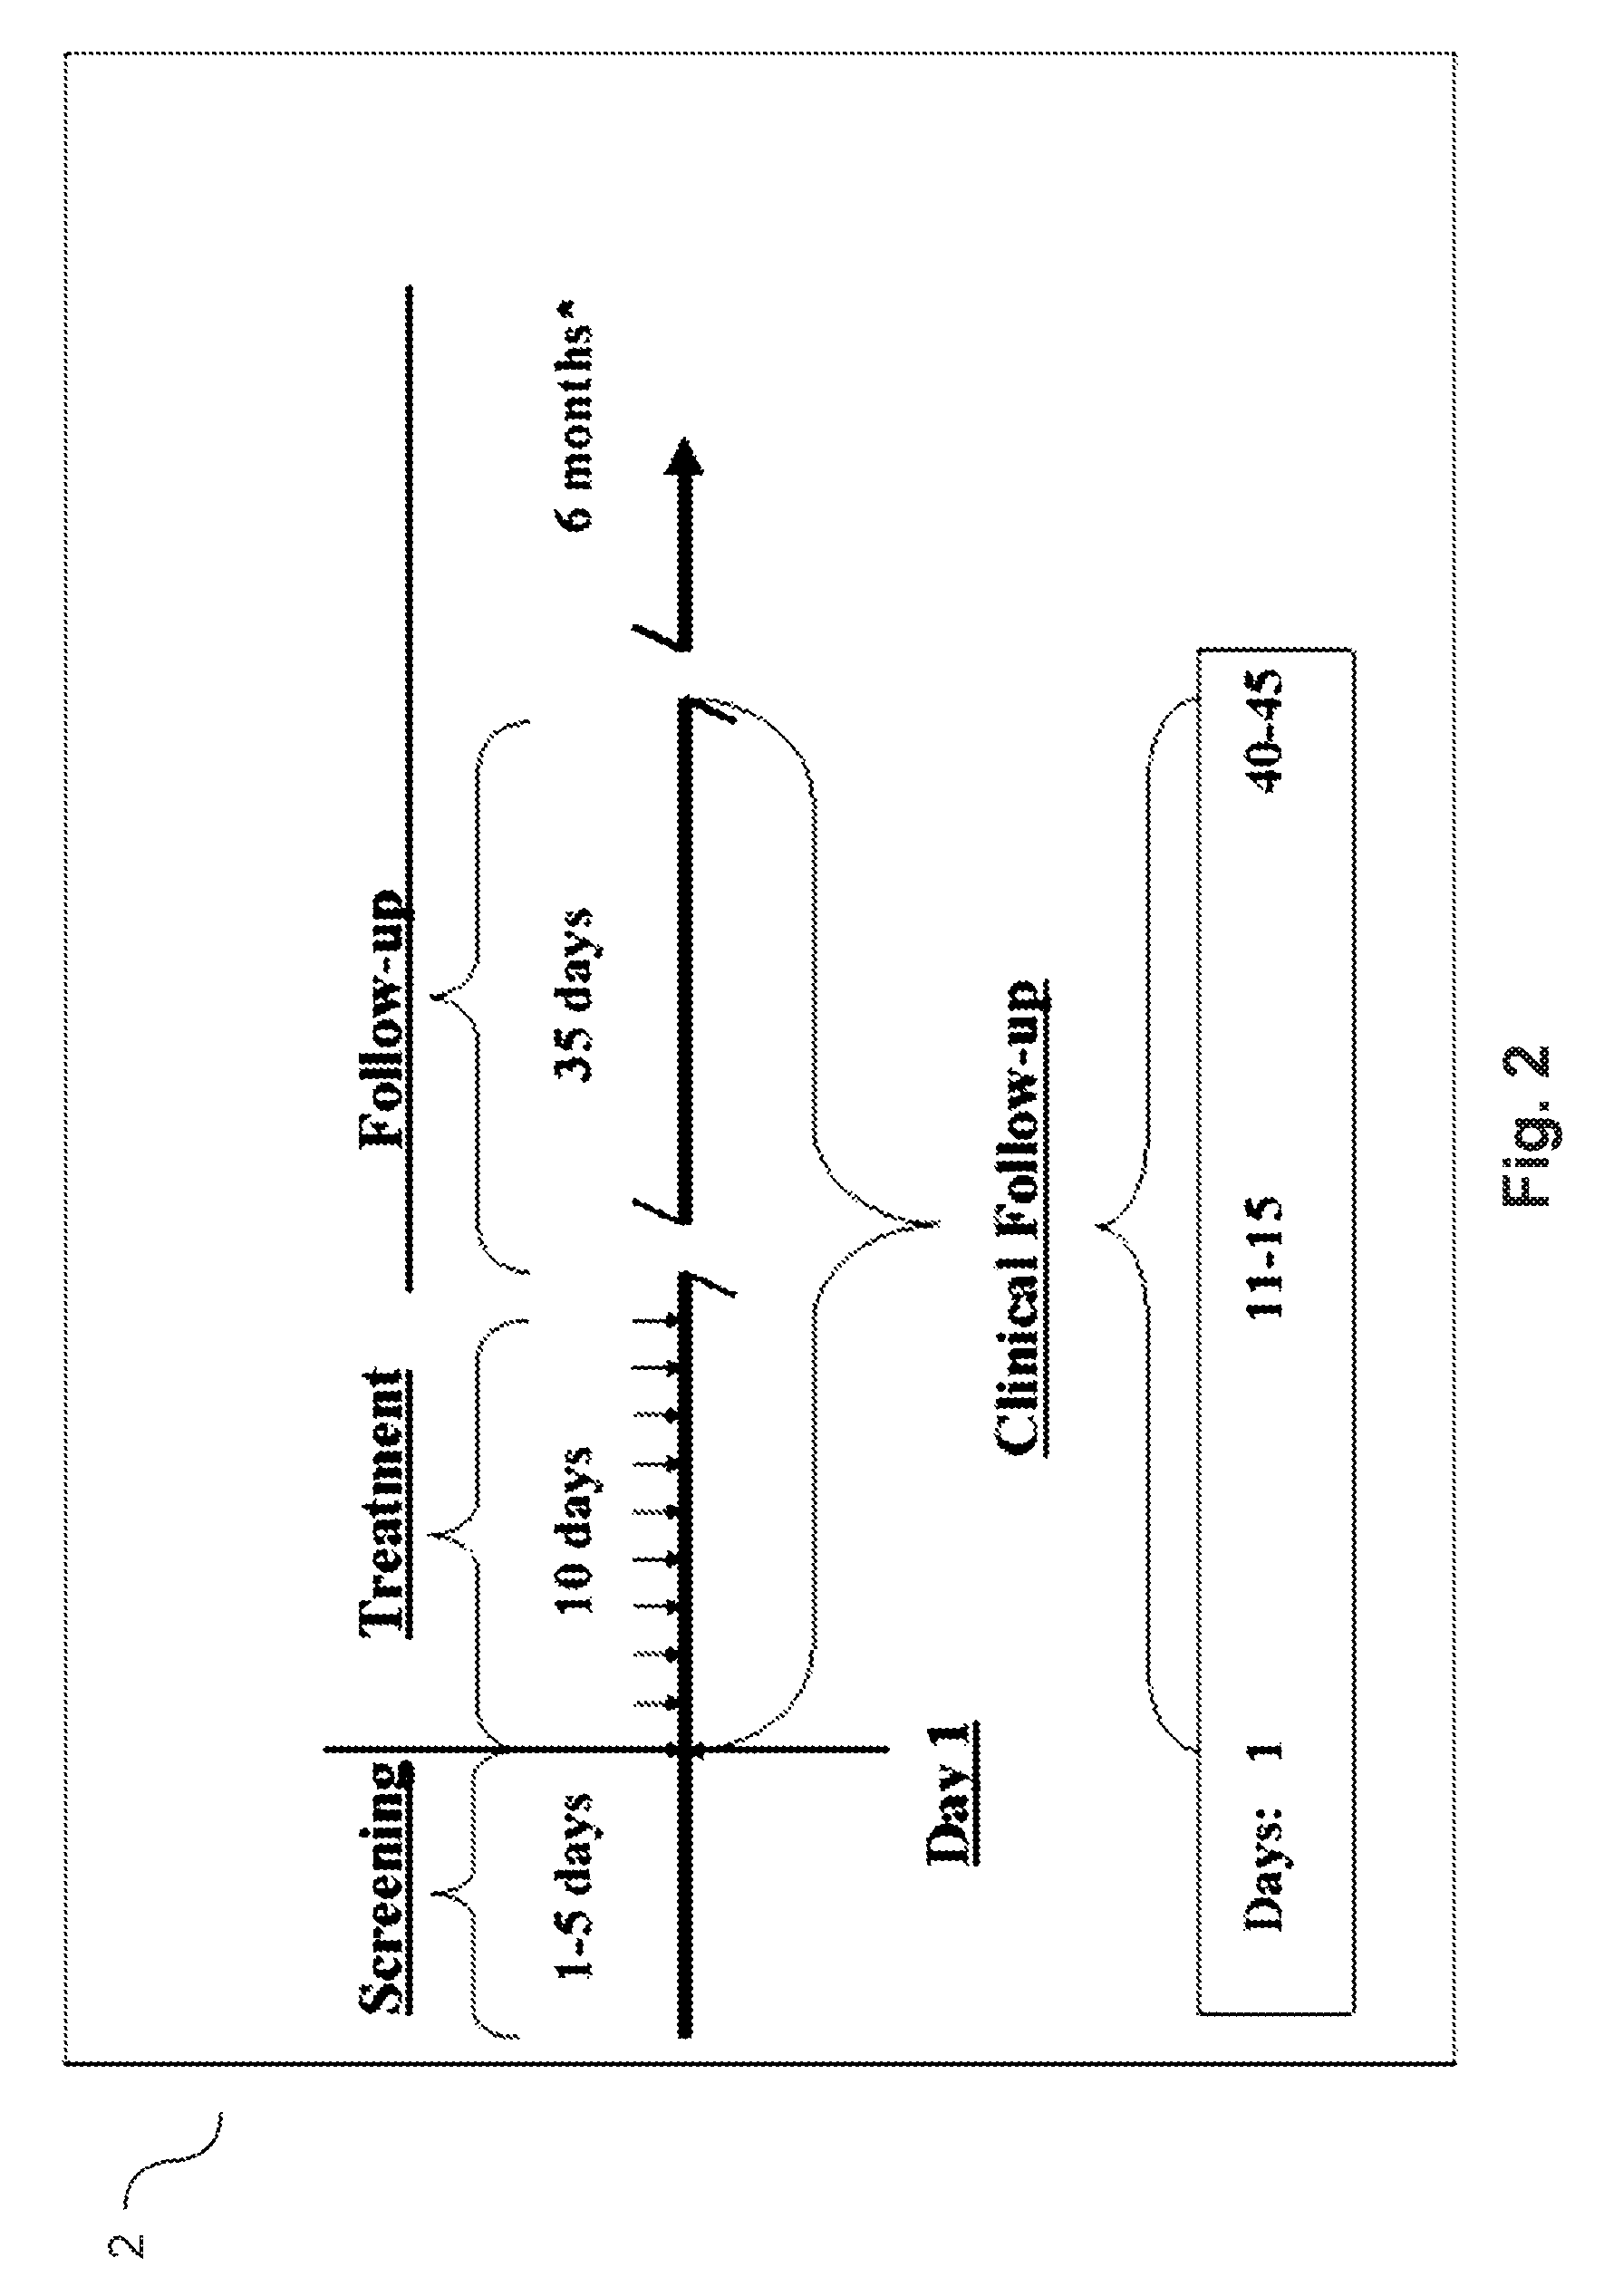 Agmatine containing dietary supplements, nutraceuticals, and foods